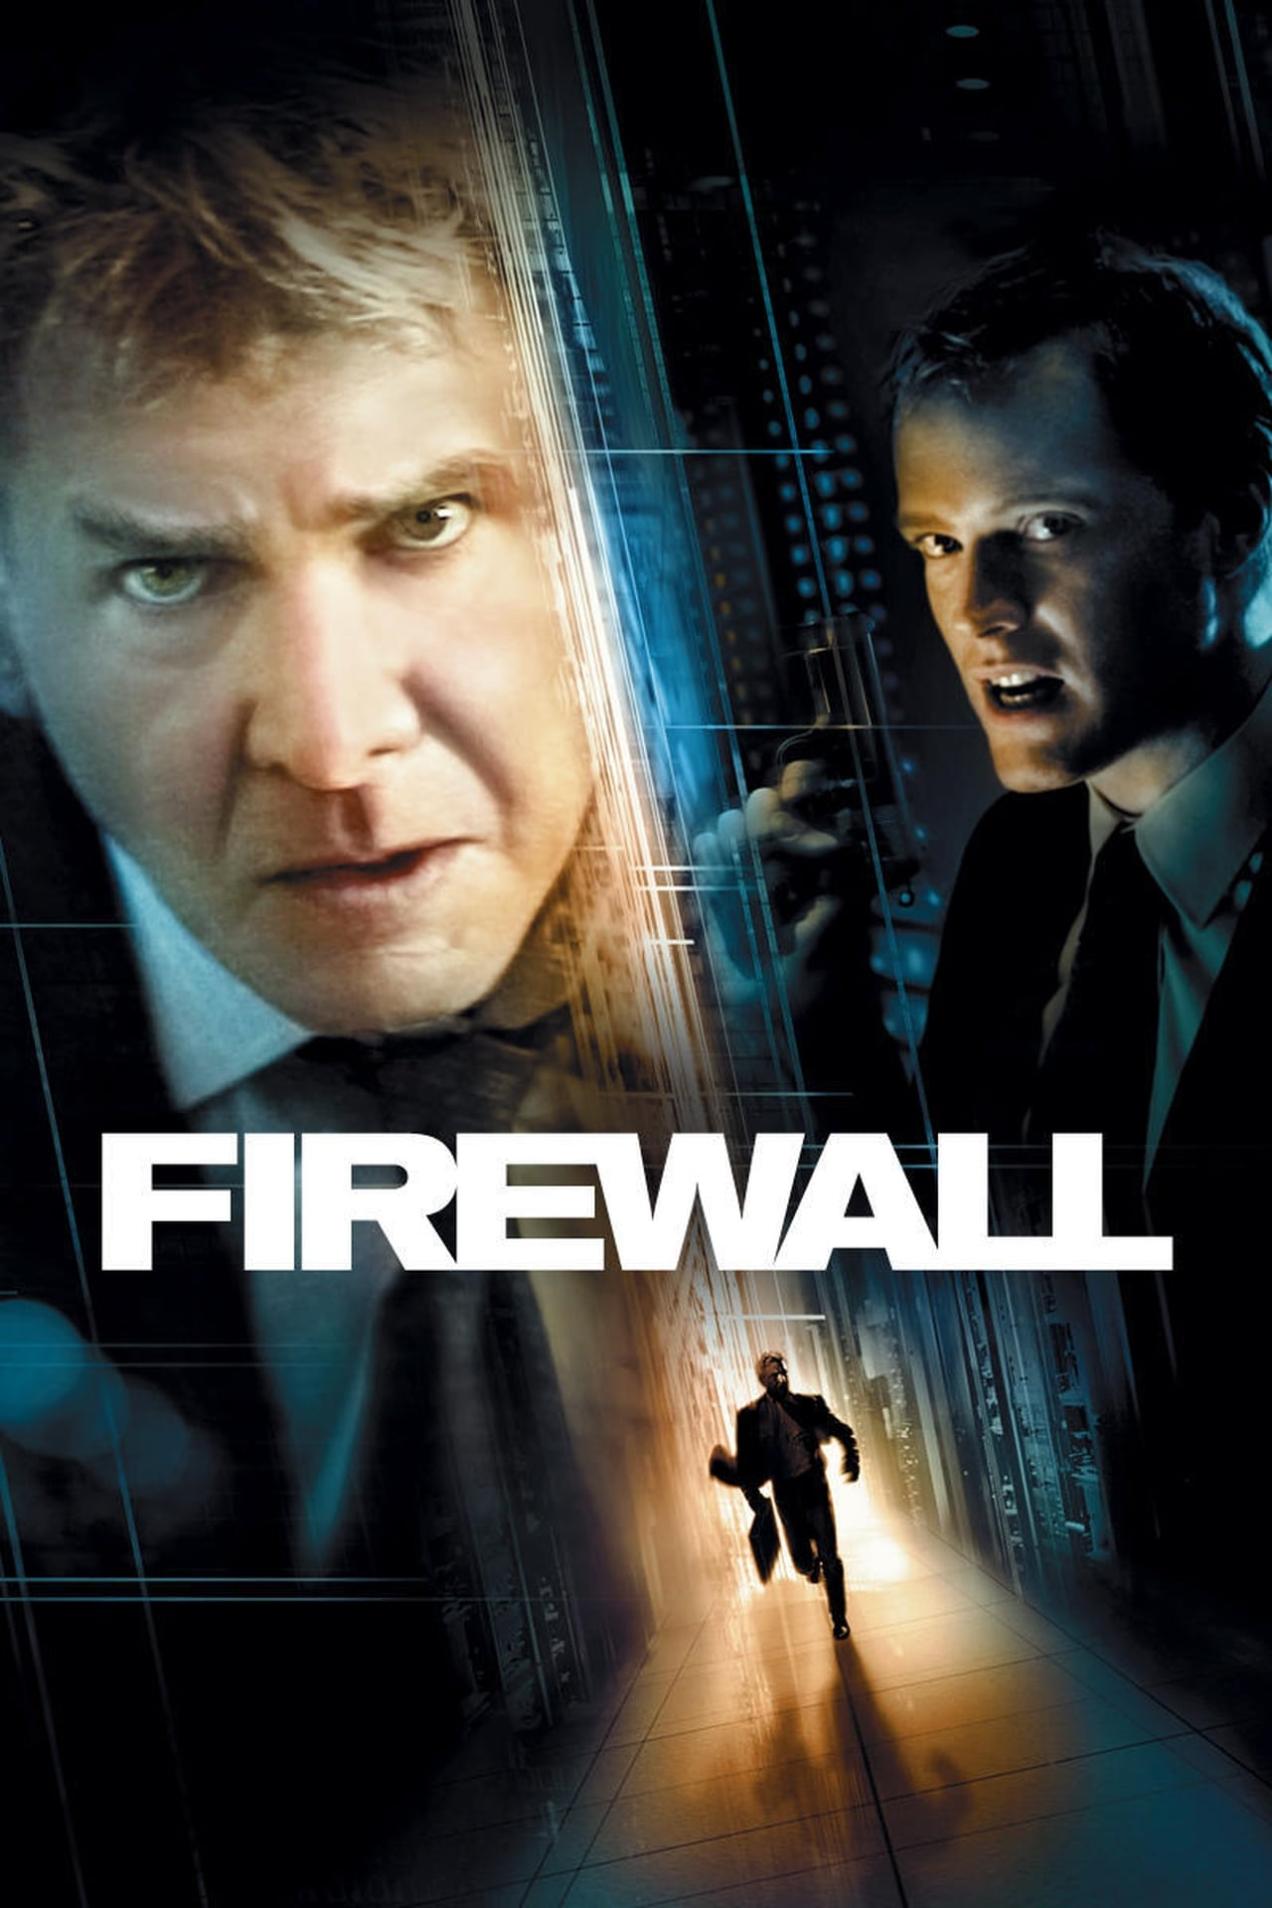 What Should I Do If My Firewall Is Not Working Properly?